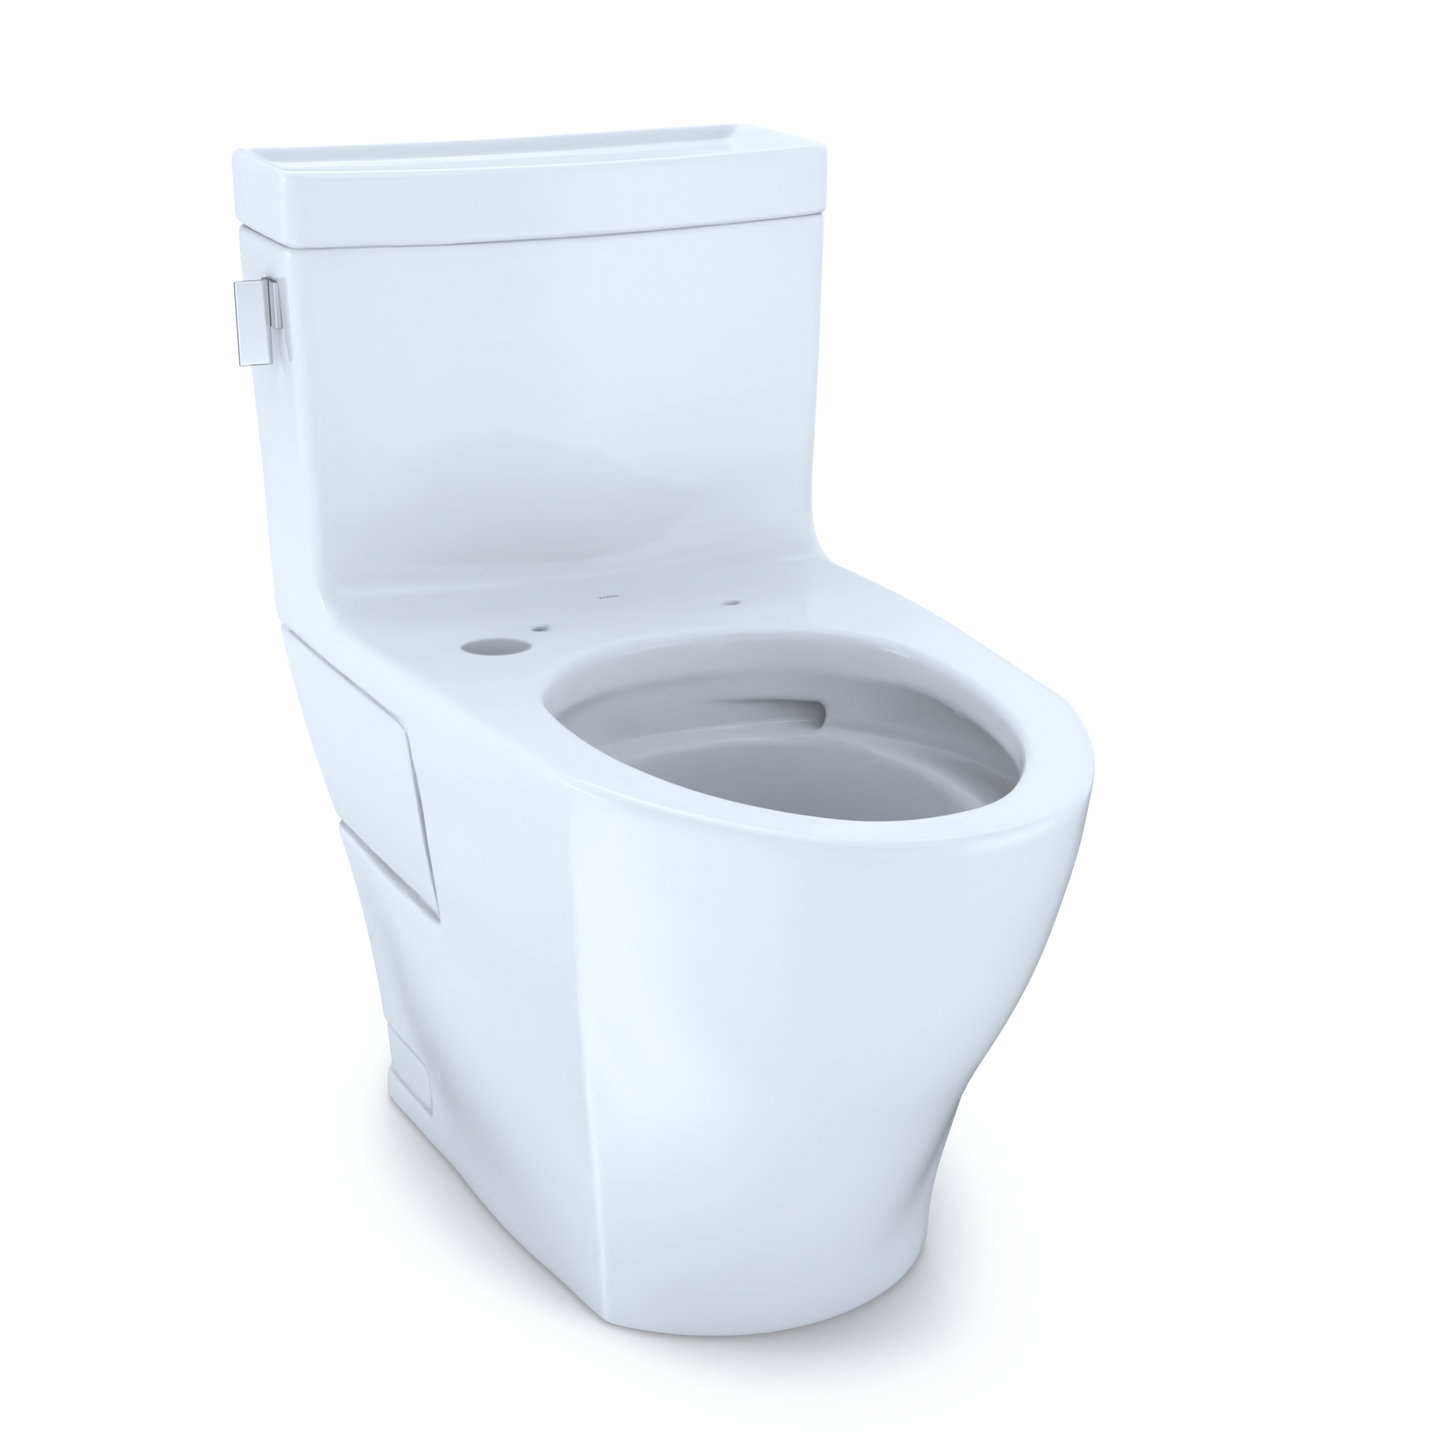 Toto CST624CEFGAT40#01 - Legato 1.28 GPF One Piece Elongated Chair Height Toilet with Tornado Flush